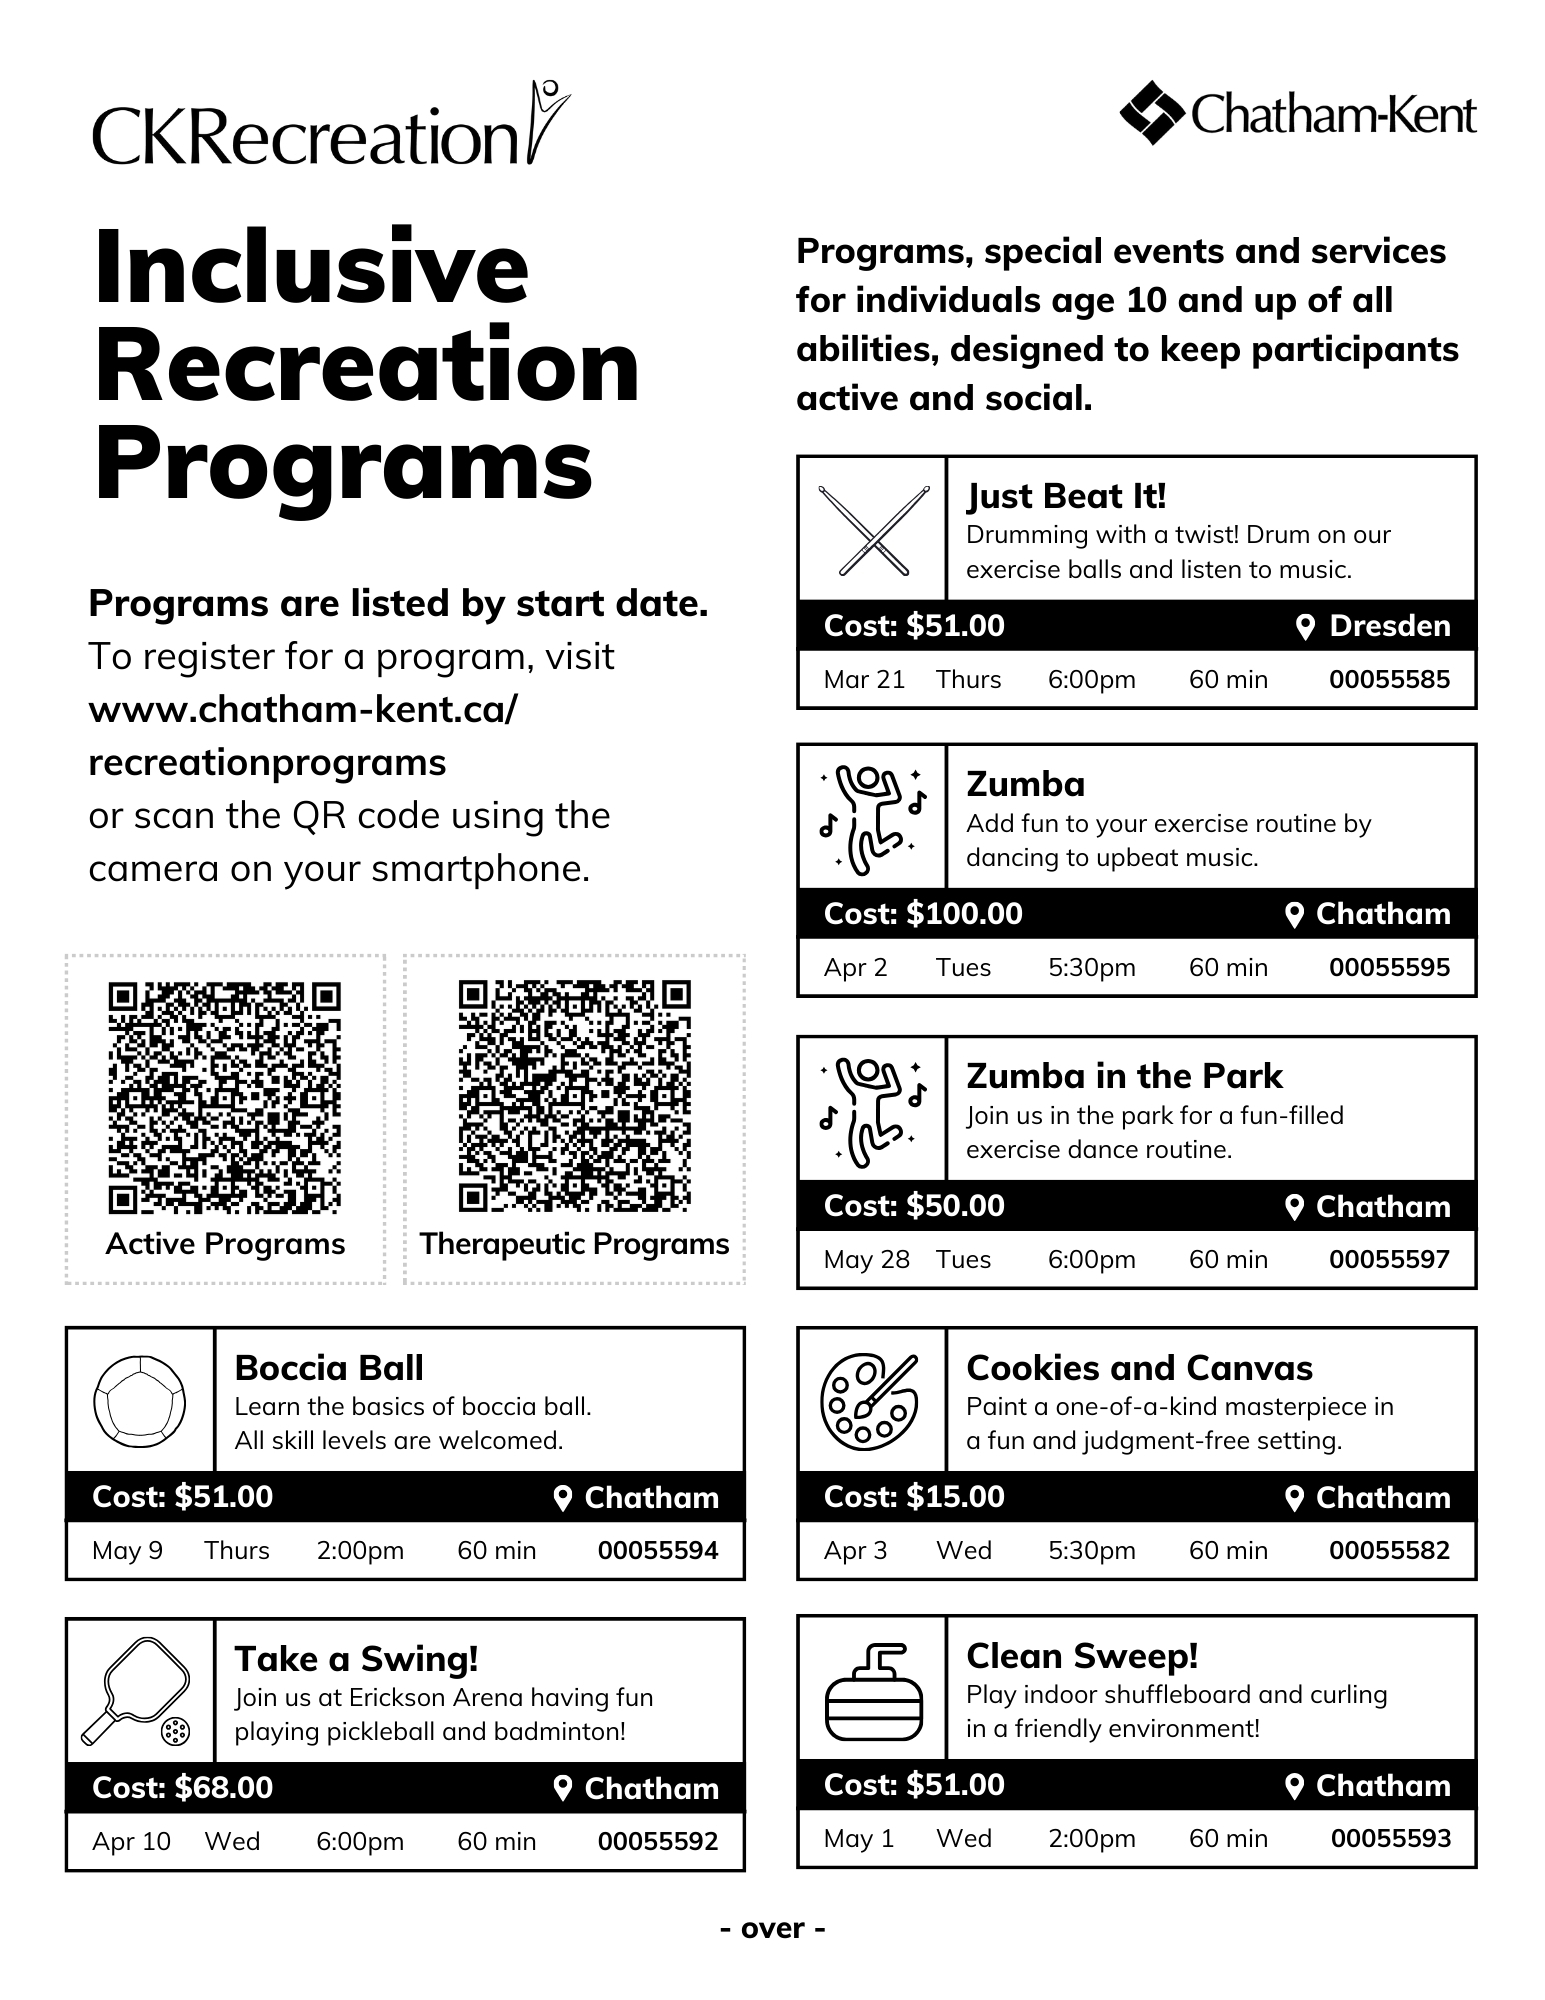 Image of the front of the preschool program guide